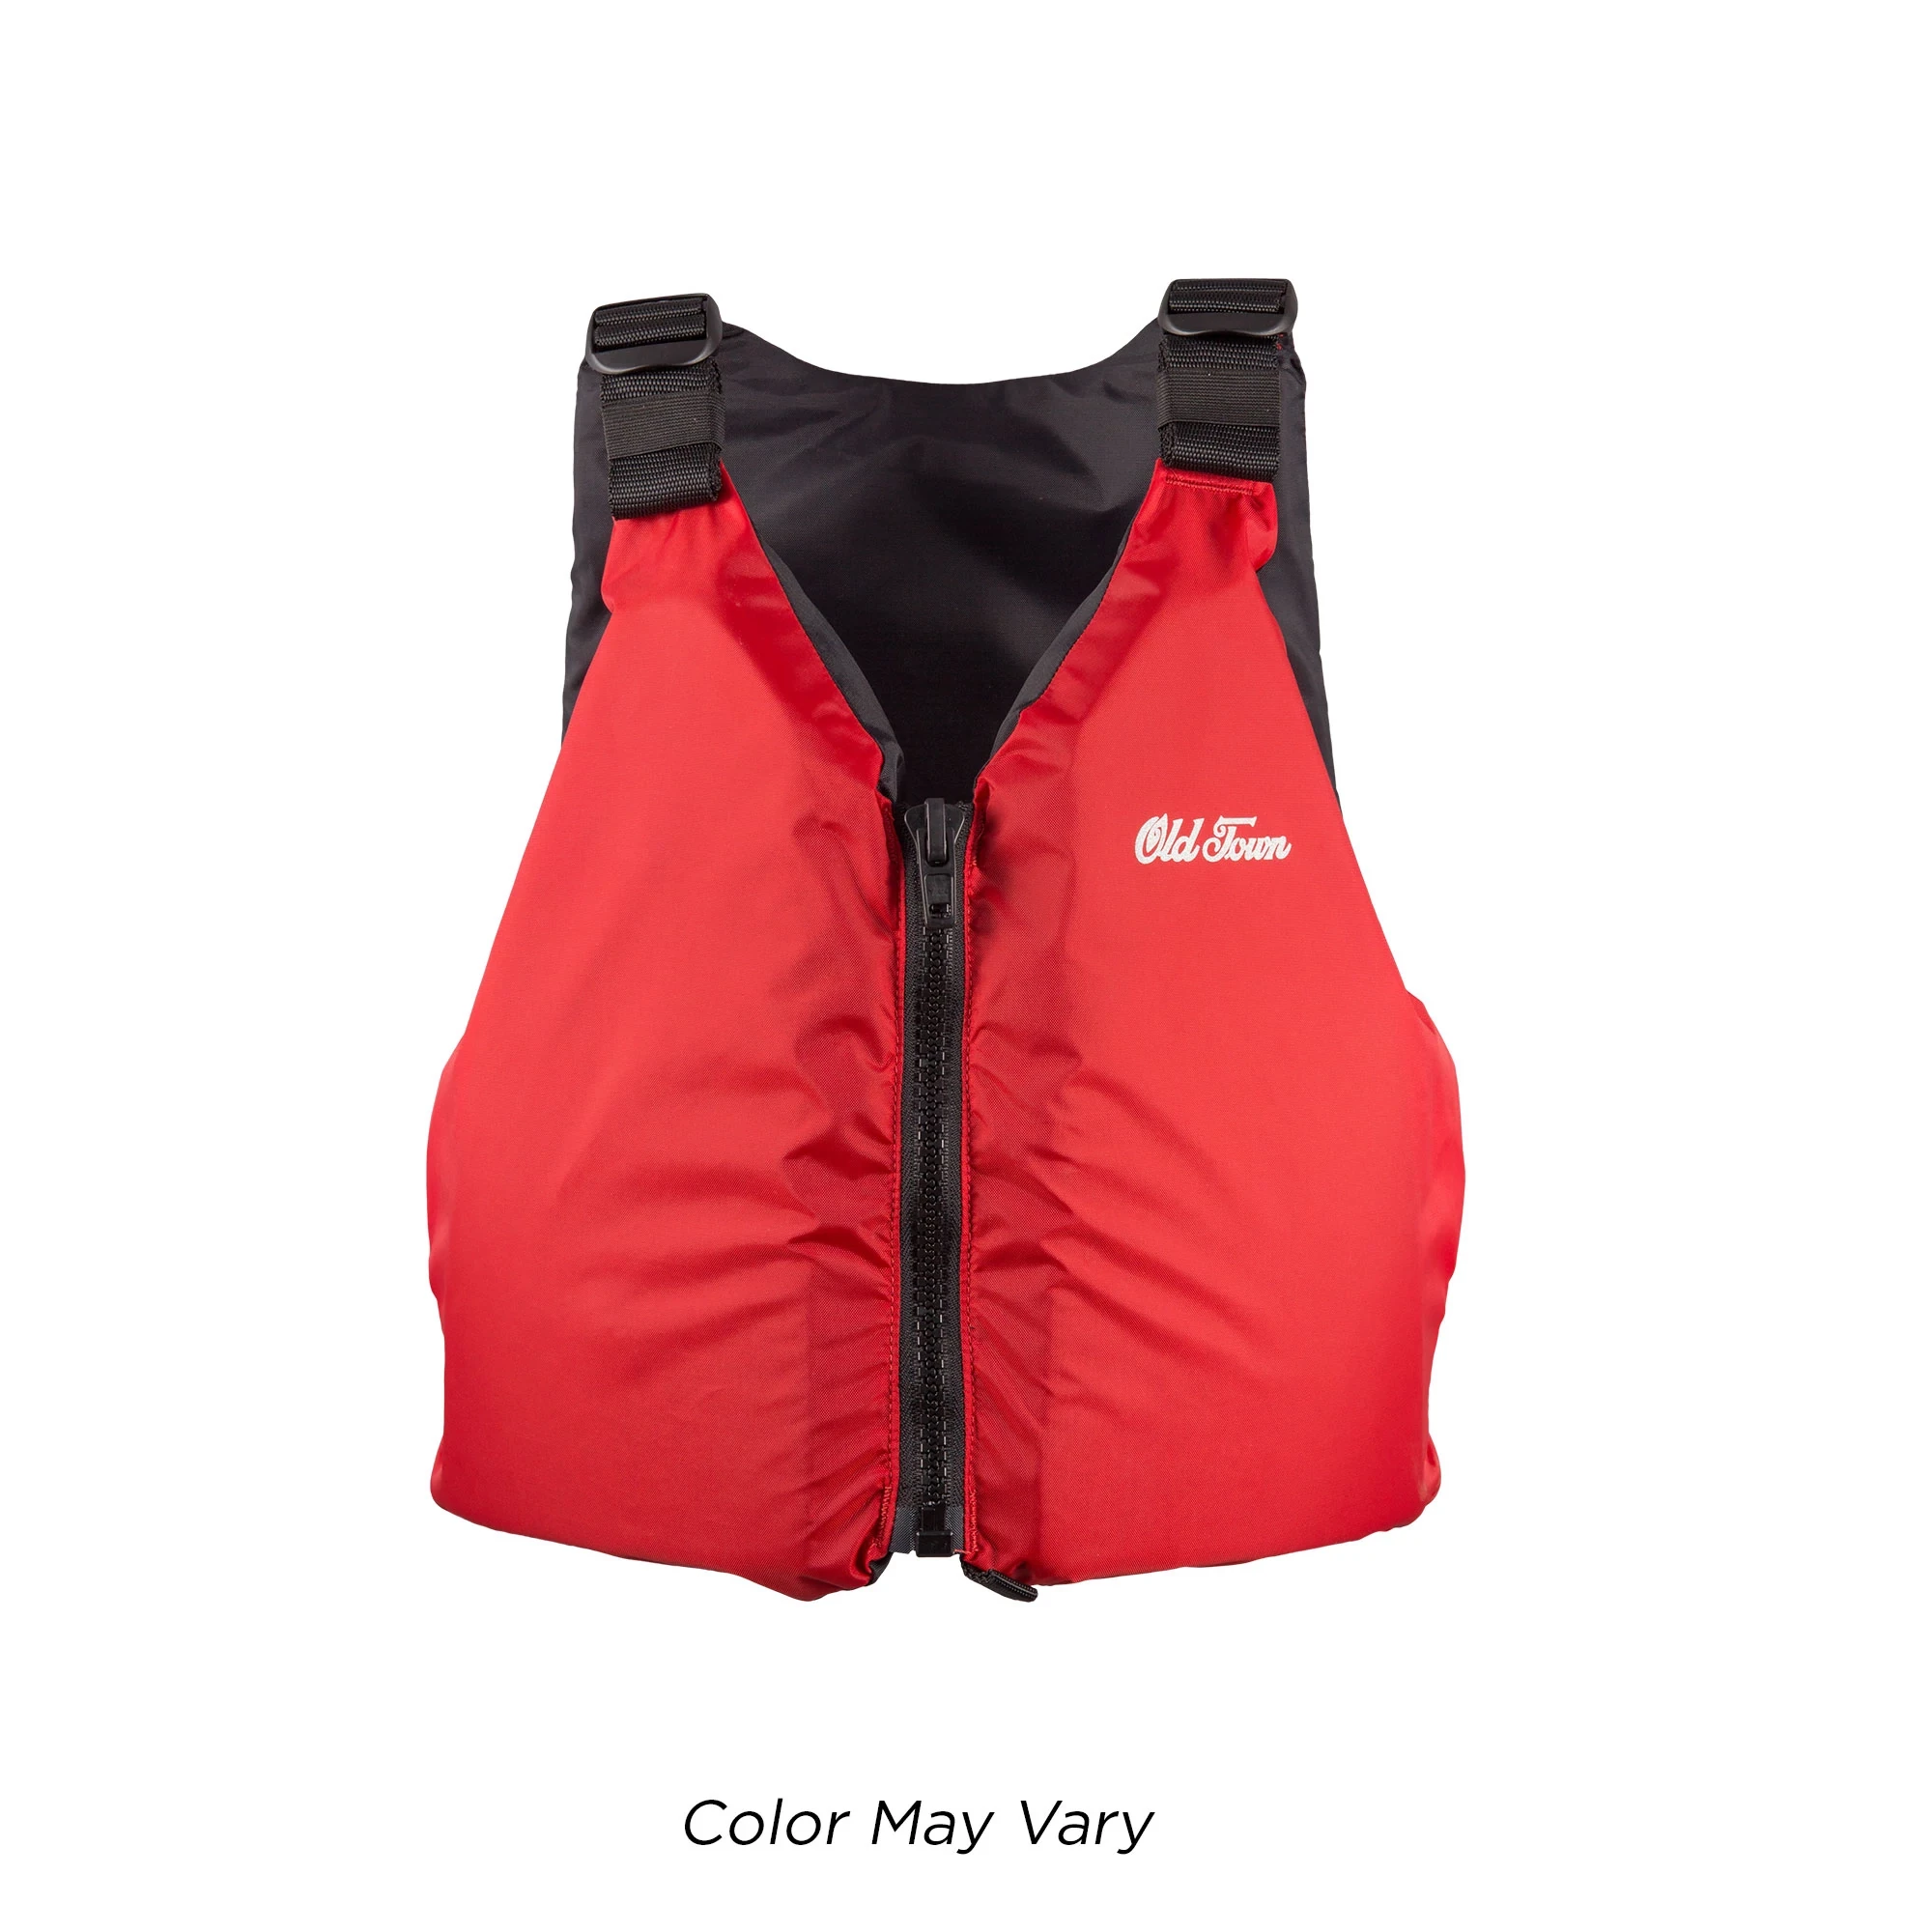 Front view of Outfitter Universal PFD included in Ocean Kayak Caper Old Glory Bundle